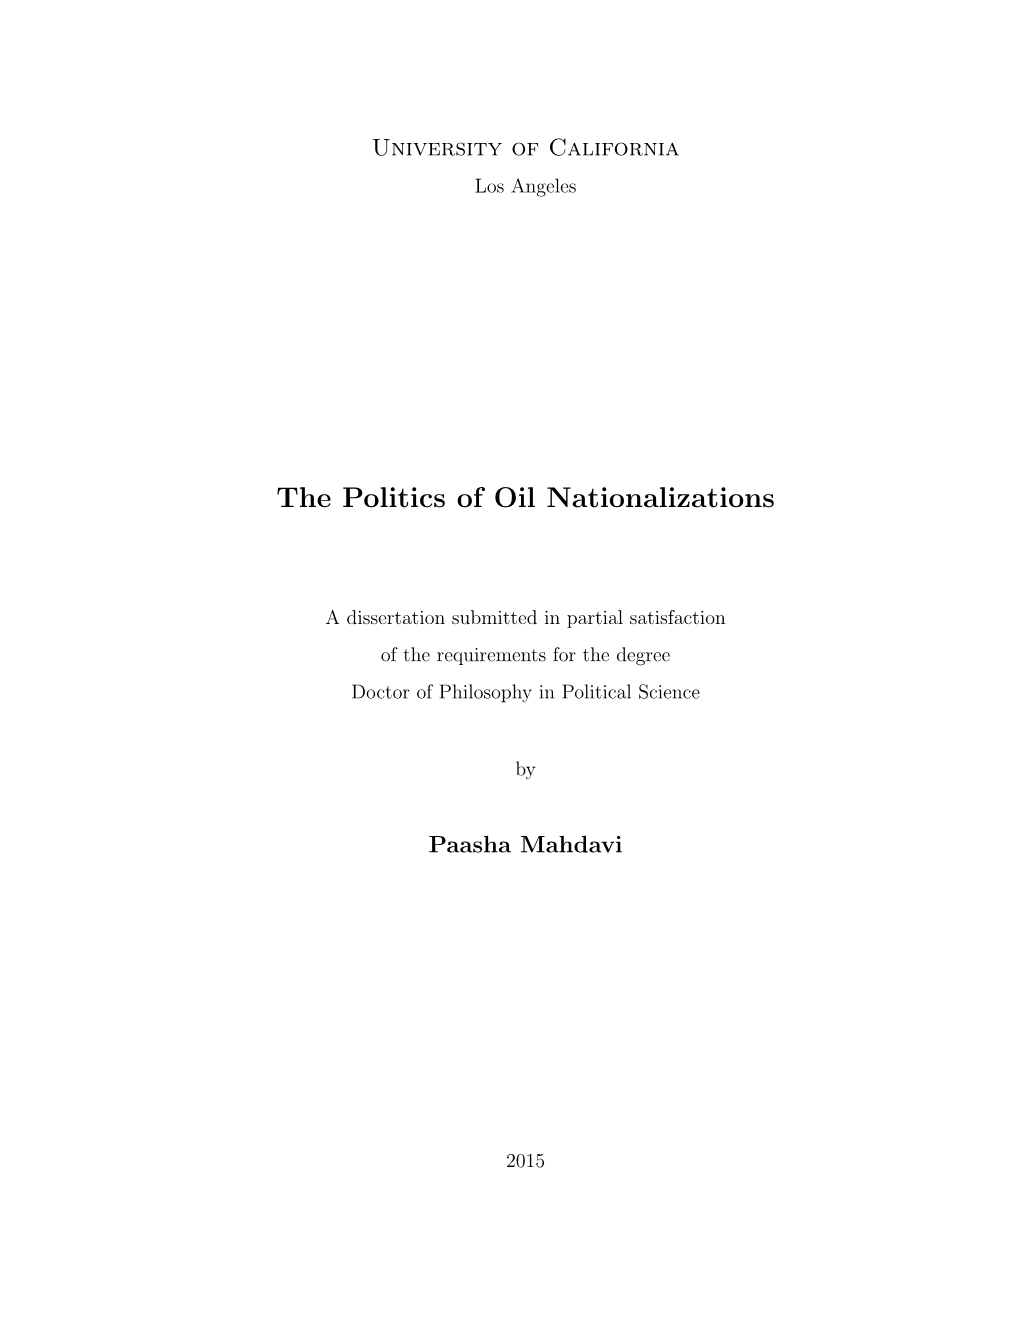 The Politics of Oil Nationalizations